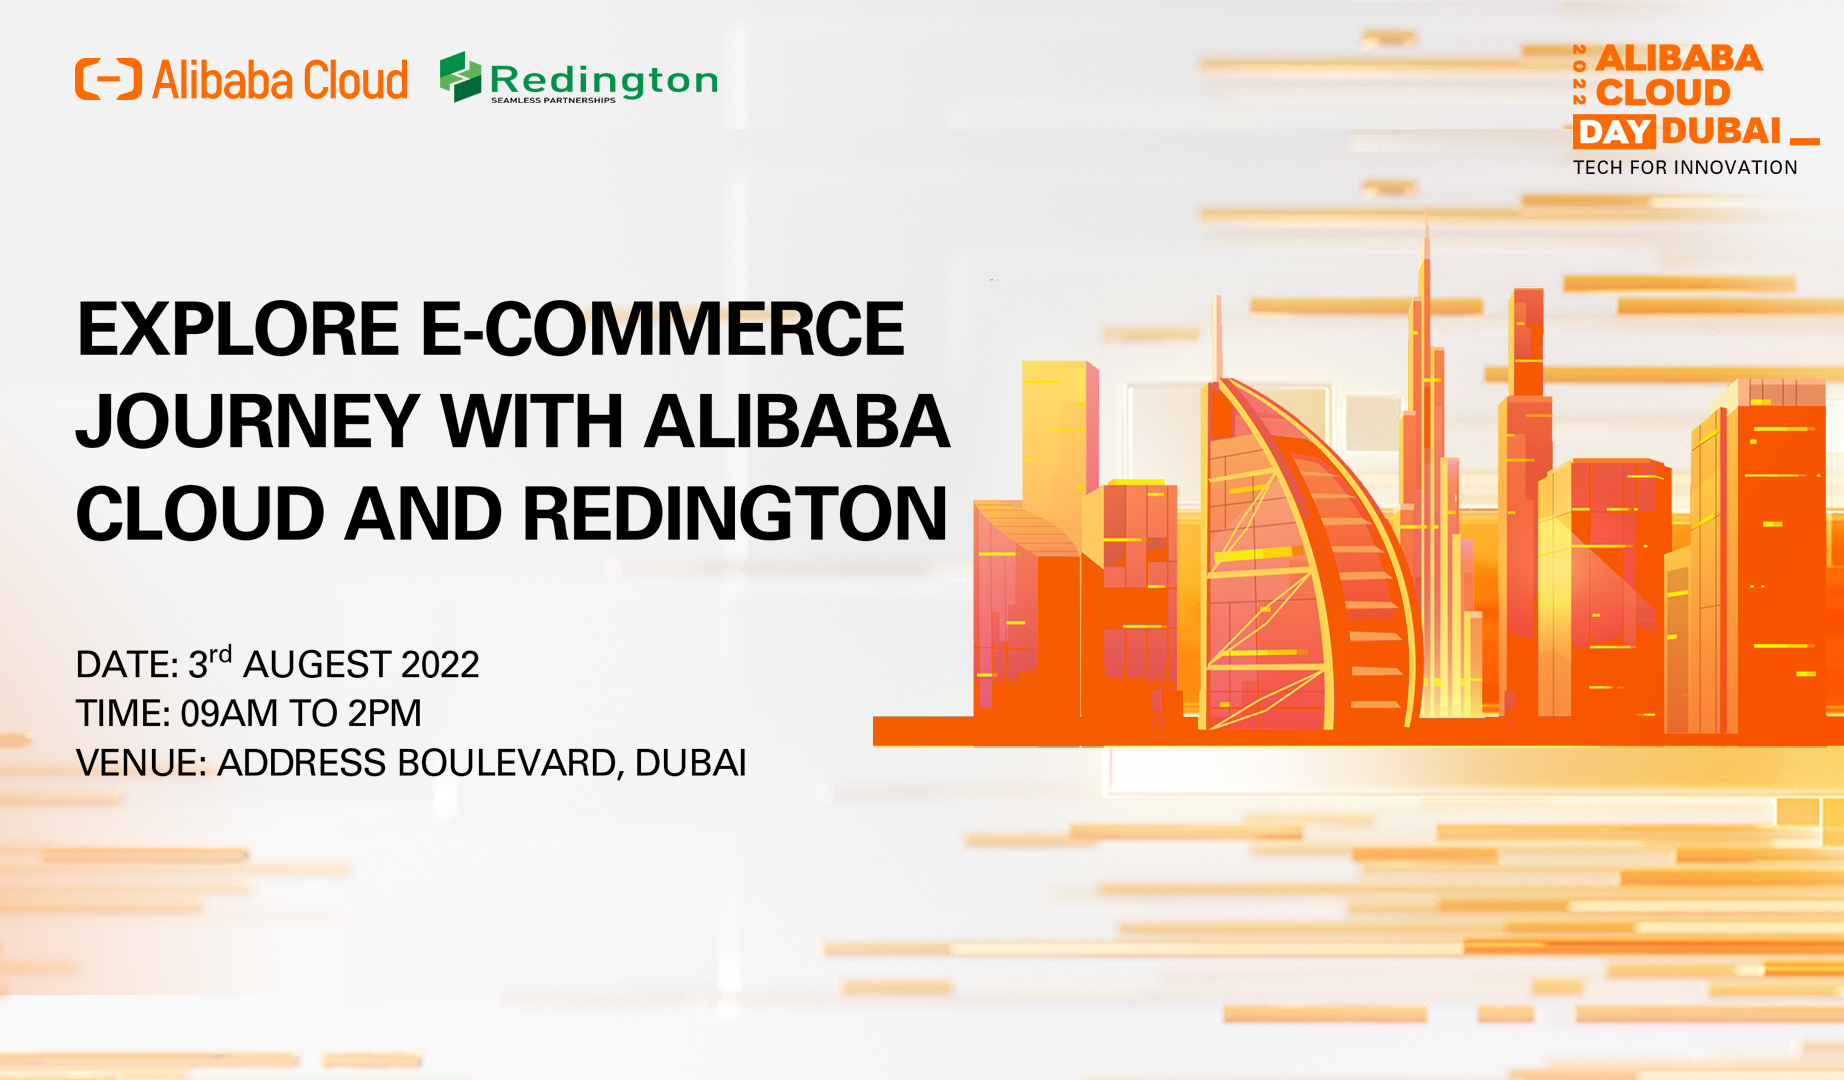 Explore E-commerce Journey With Alibaba Cloud and Redington